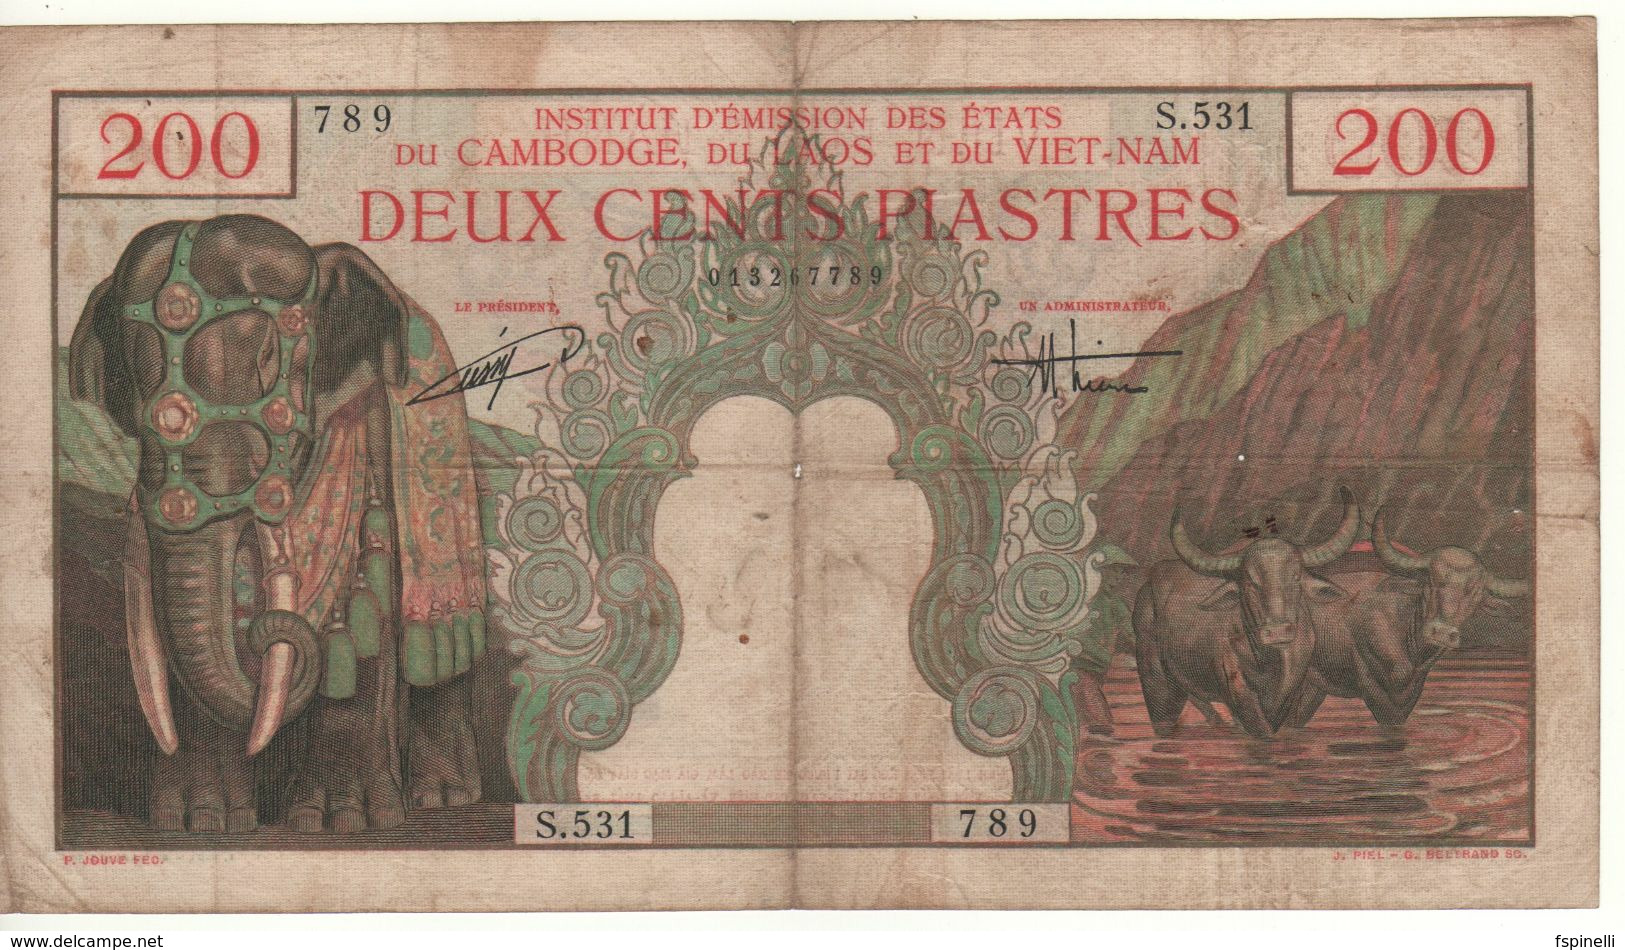 FRENCH INDOCHINA   200  Piastres  / Đồng / Riels / Kip    P109   ( Vietnam   ND - 1953 ) - Indochine